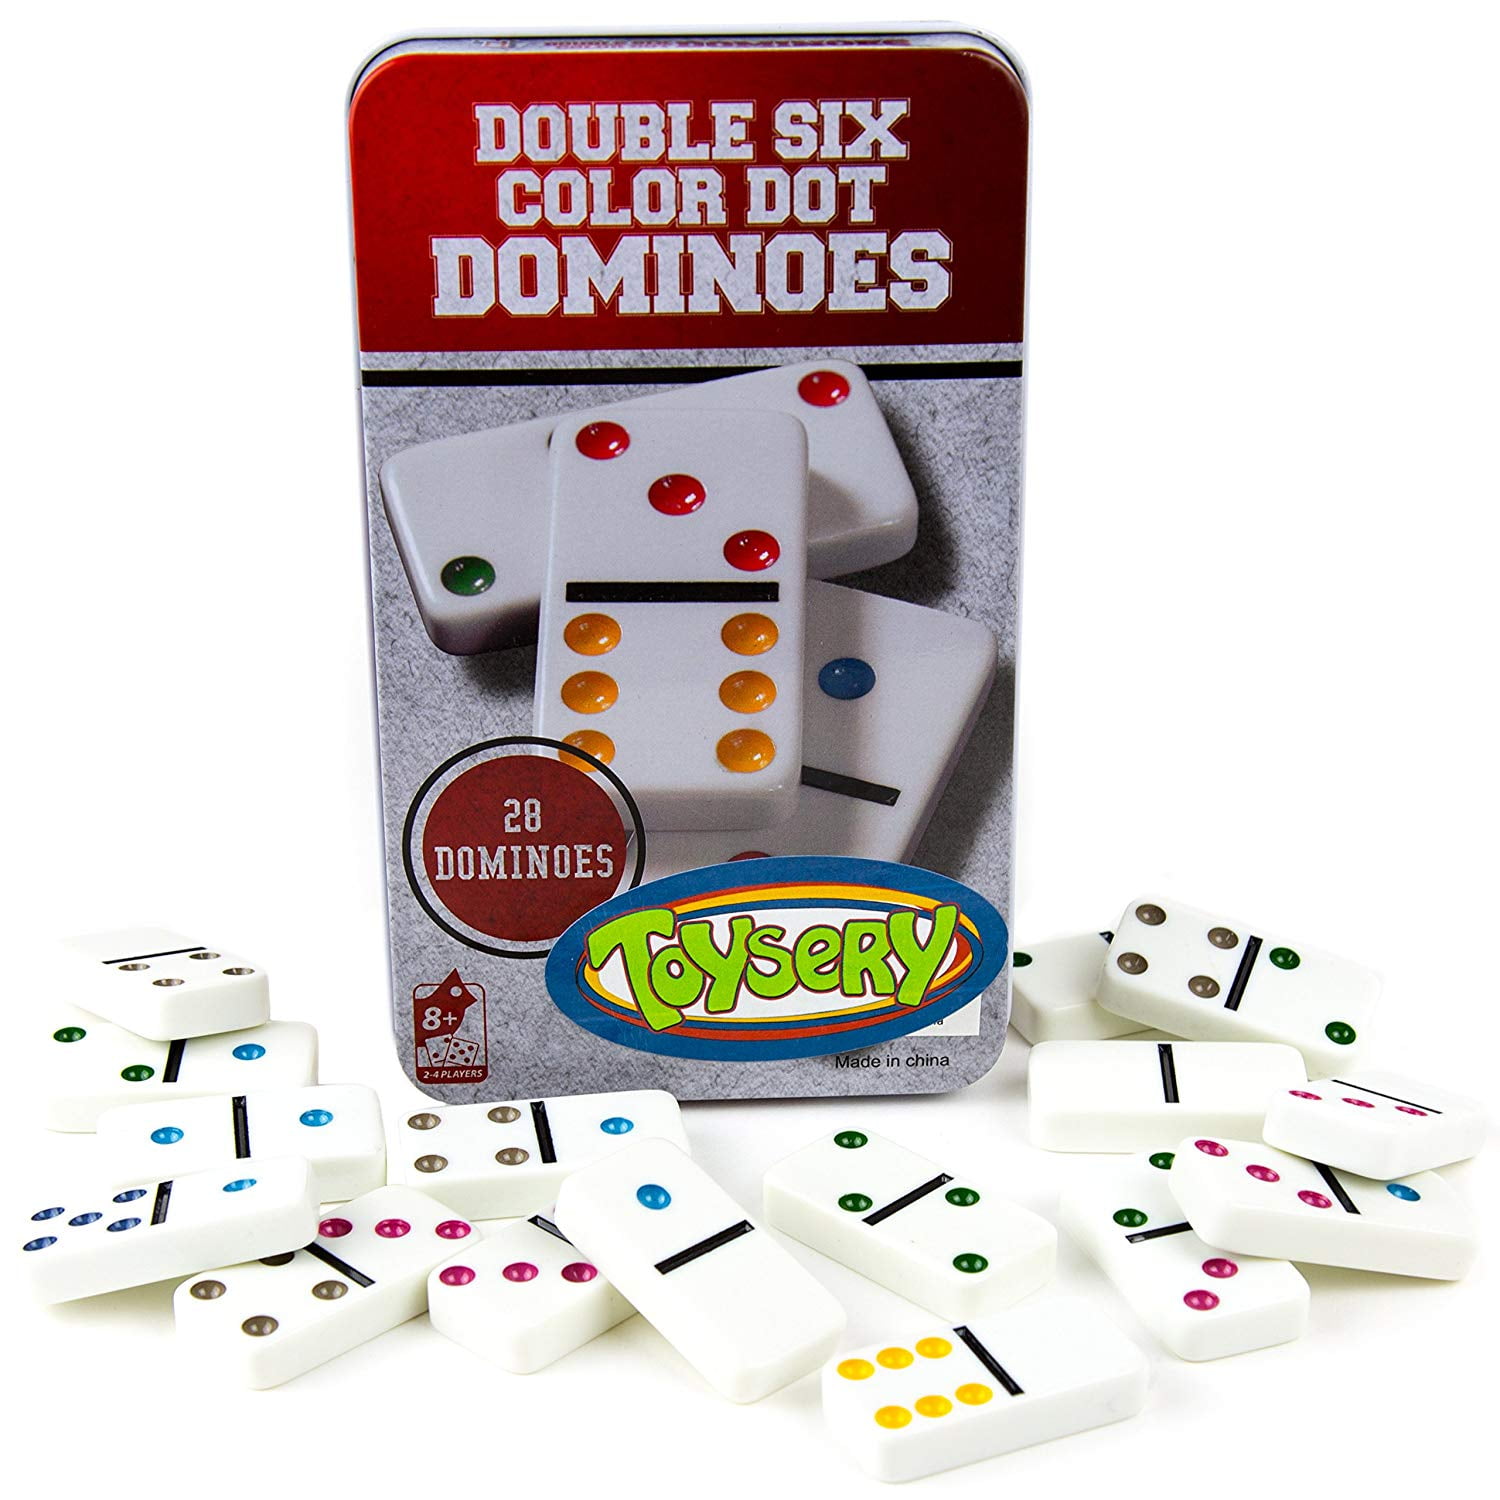 Case Color May Very Double Six Professional Dominoes White With Black Dots 